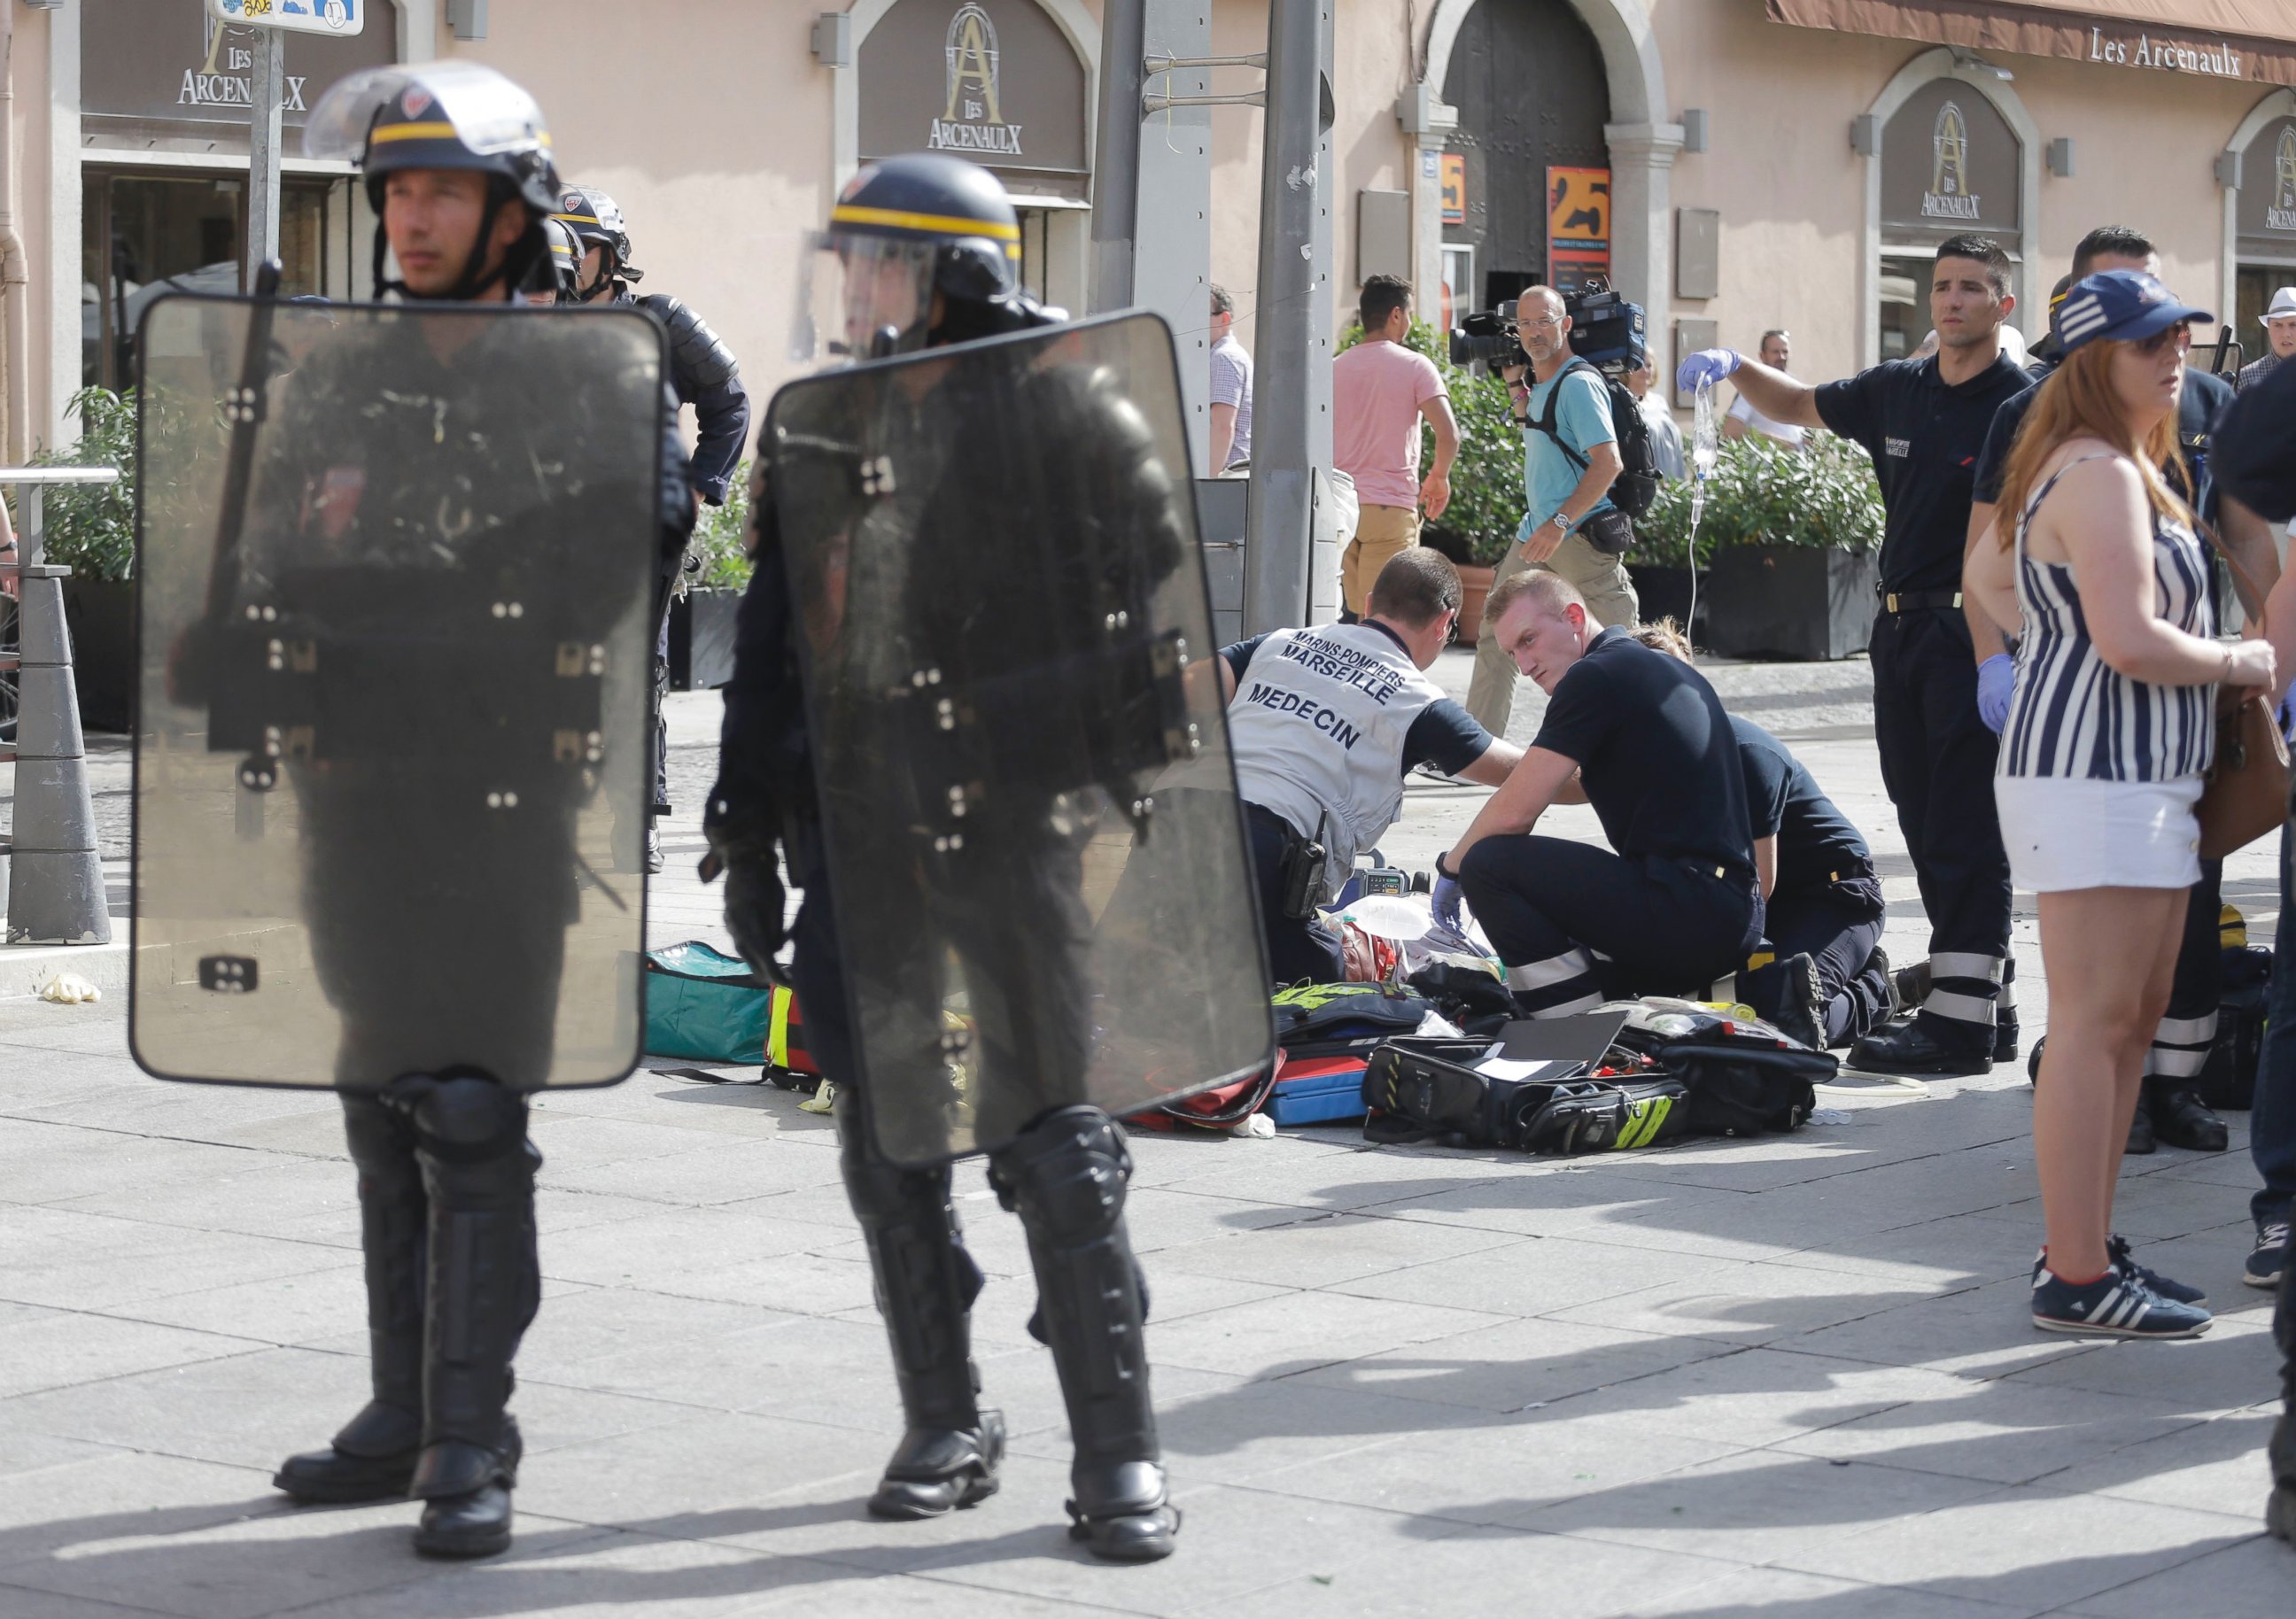 PHOTO: An man injured in clashes is assisted by the emergency services in downtown Marseille, France,  June 11, 2016.